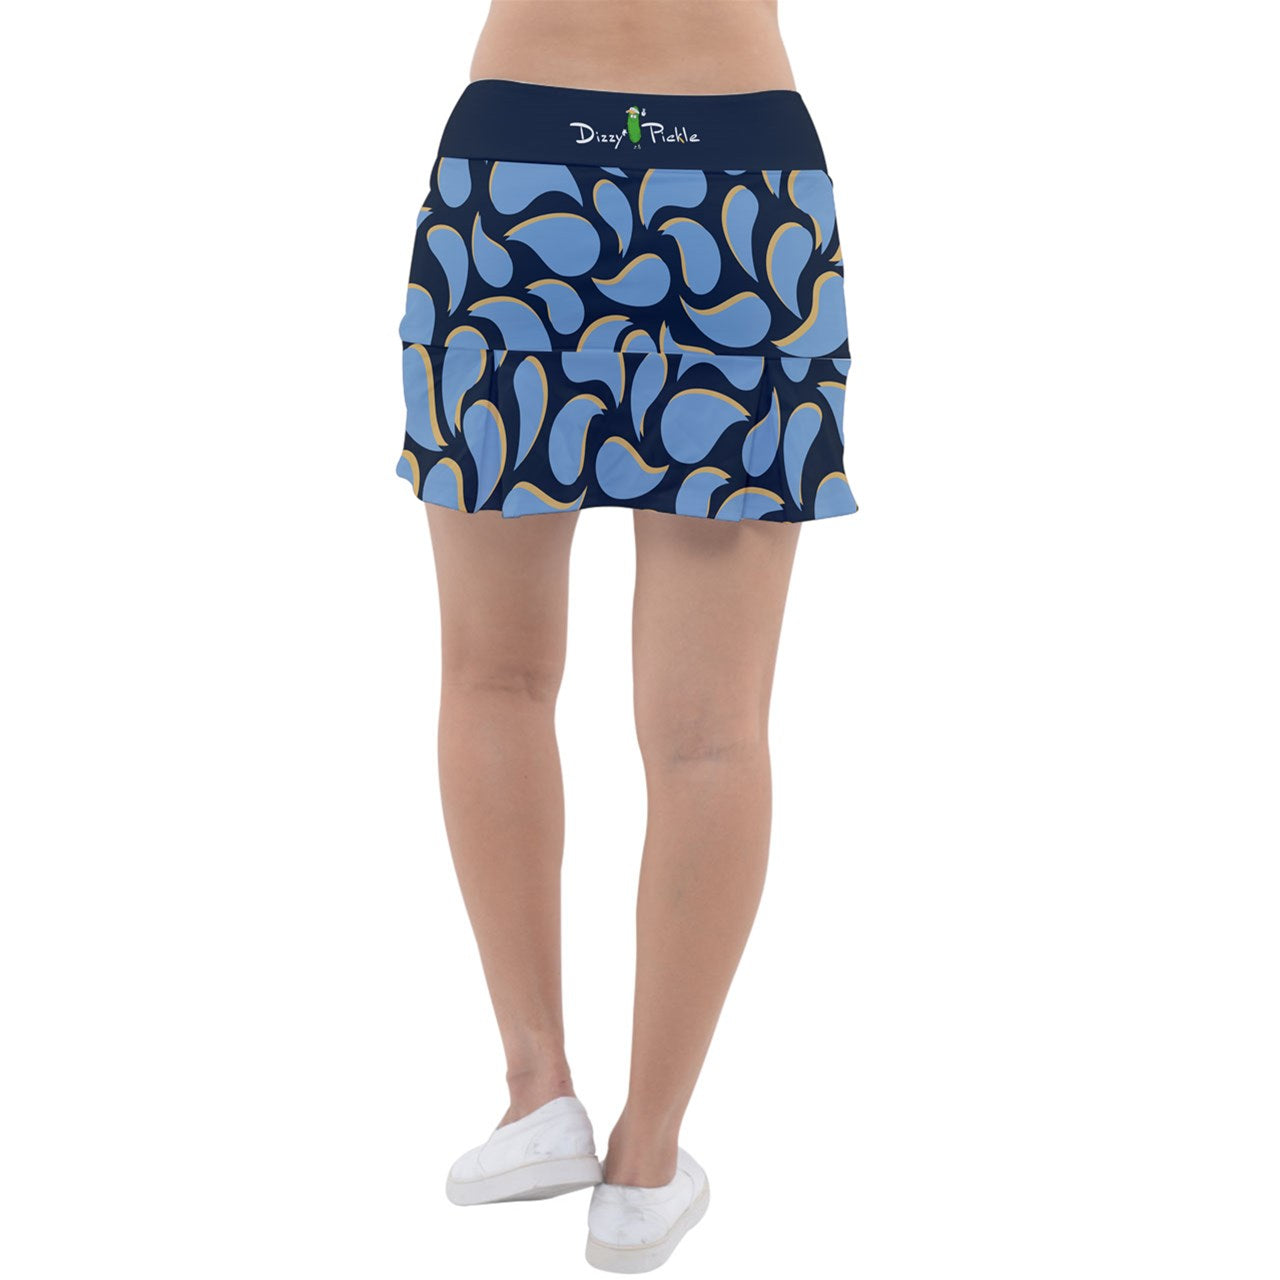 Dizzy Pickle Lesley Paisley Women's Pickleball Classic Pleated Skort Coordinating Patterned Inner Shorts Pockets Dk Blue